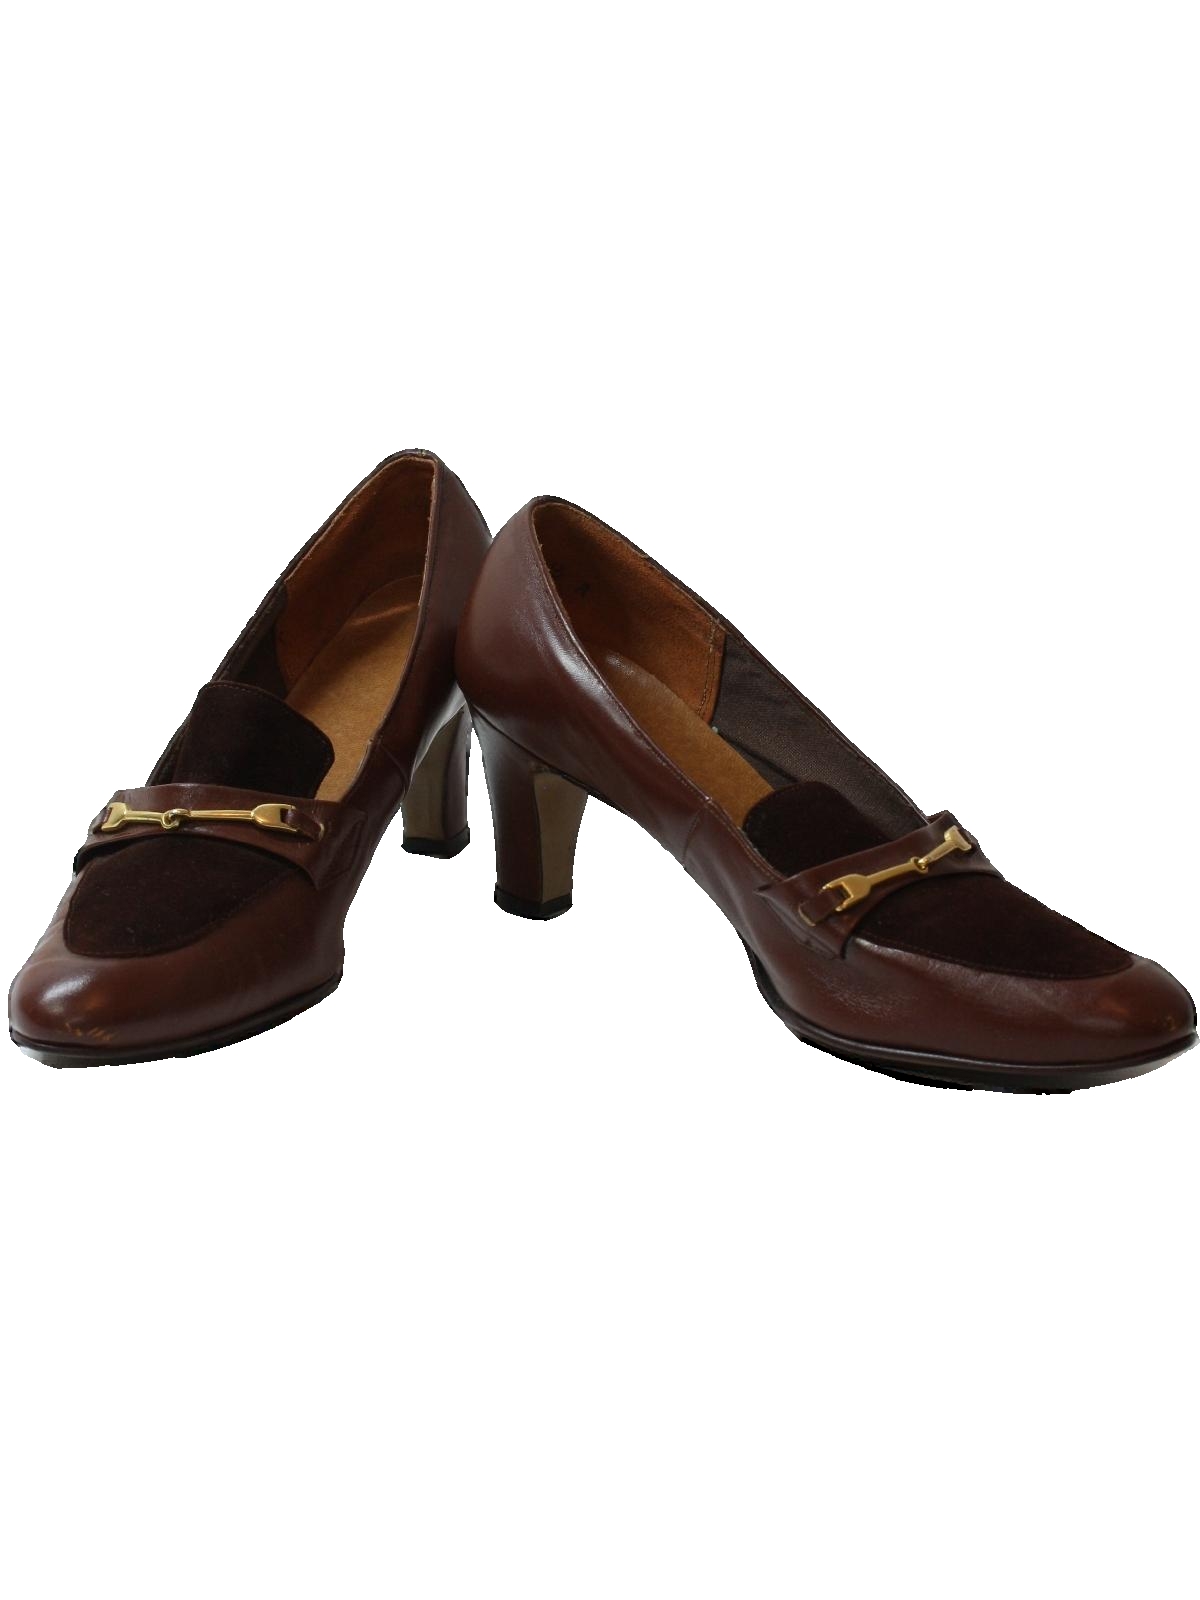 Retro 60's Shoes: 60s -Auditions- Womens brown leather 3inch heel pumps ...